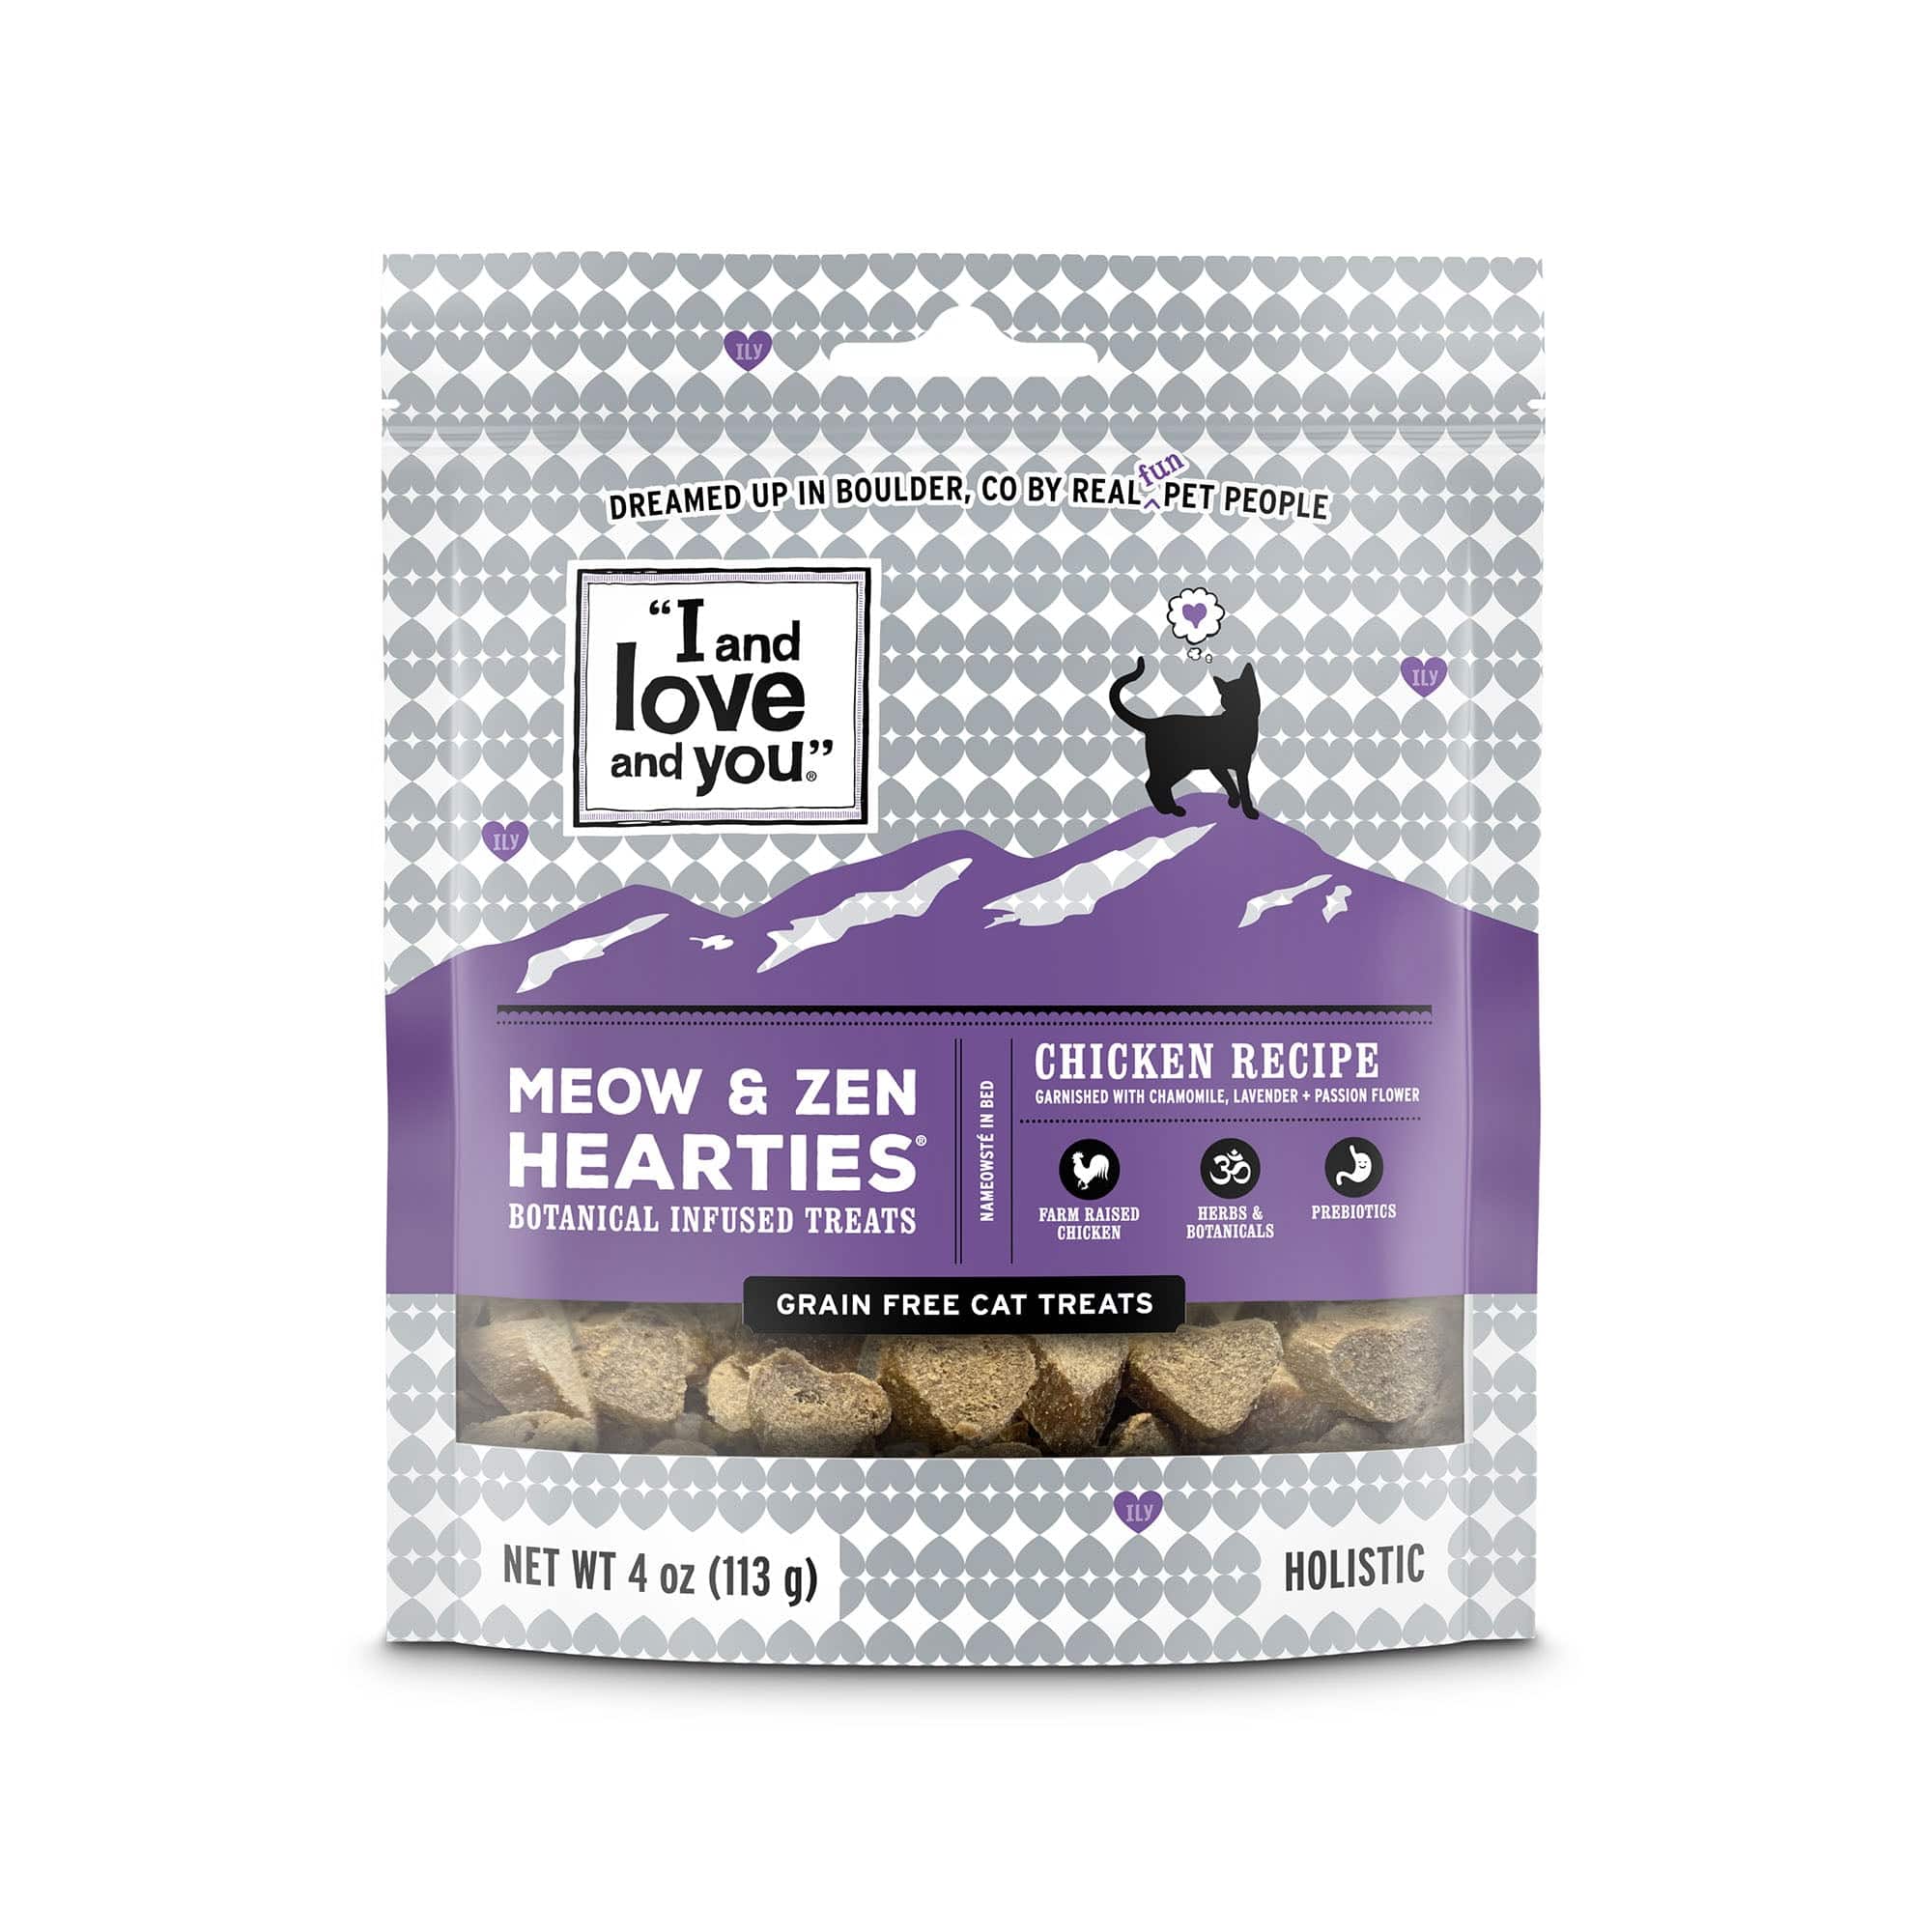 A bag of cat food, cat treats package, label, and cat silhouette with heart, Meow and Zen Hearties product image.